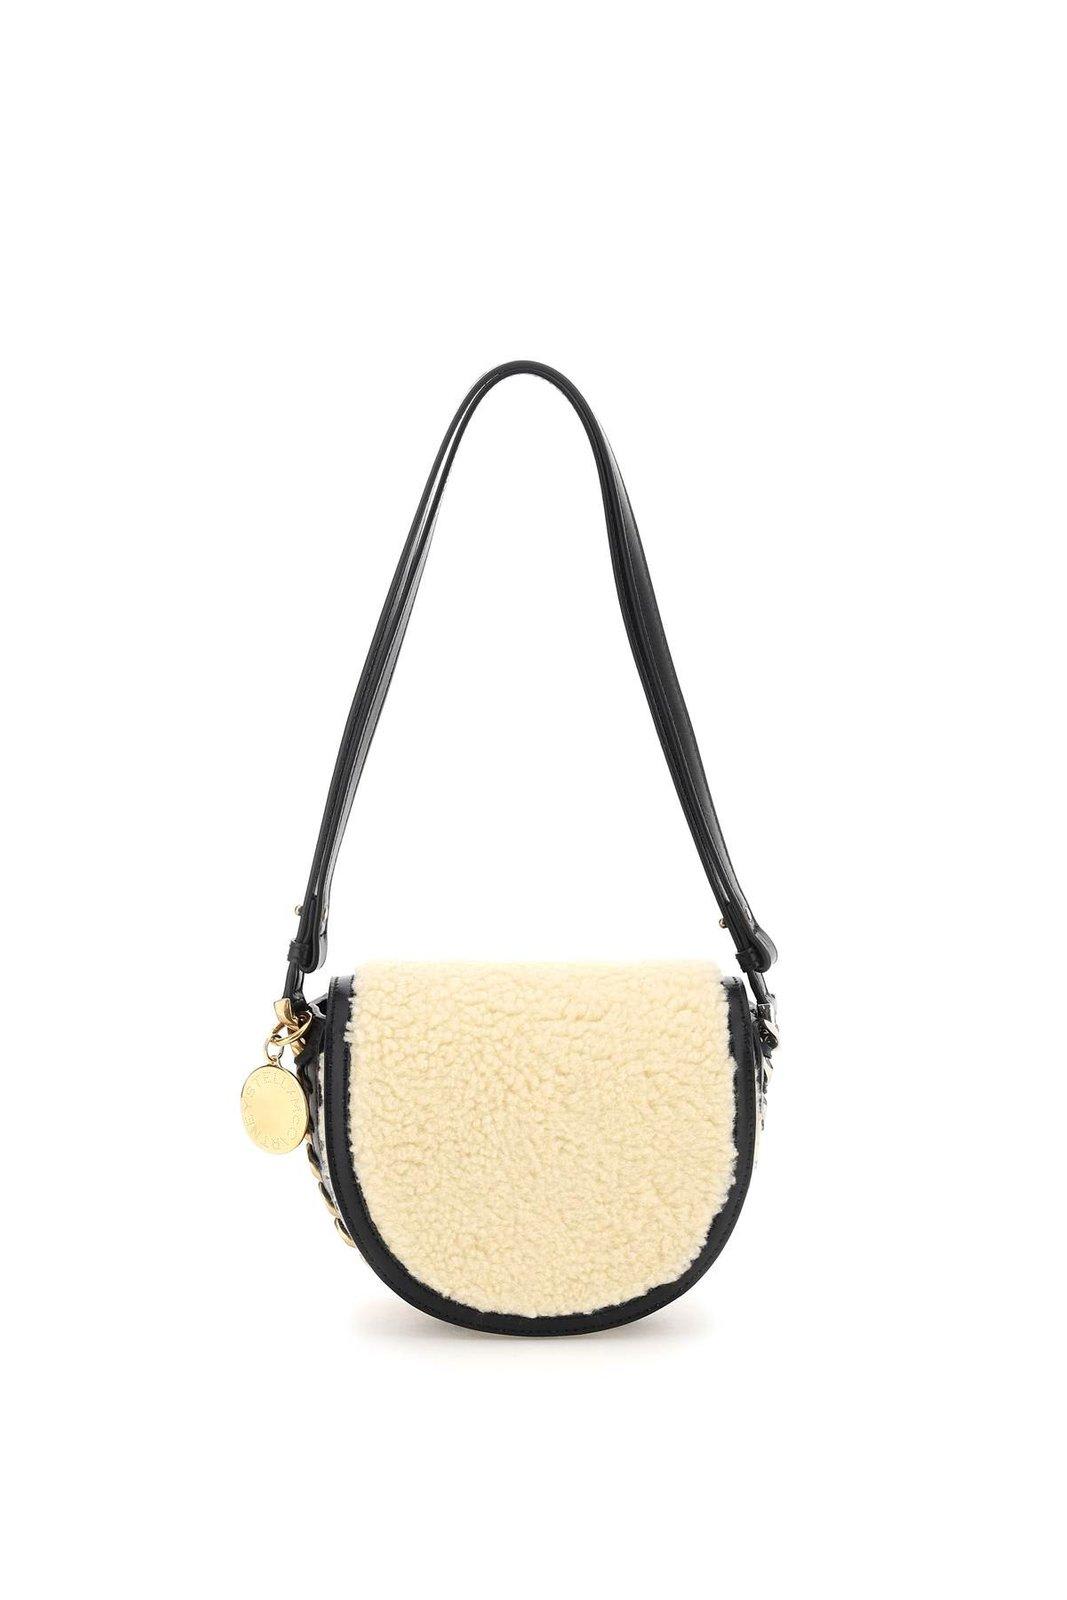 Stella McCartney Frayme Chained Small Shoulder Bag